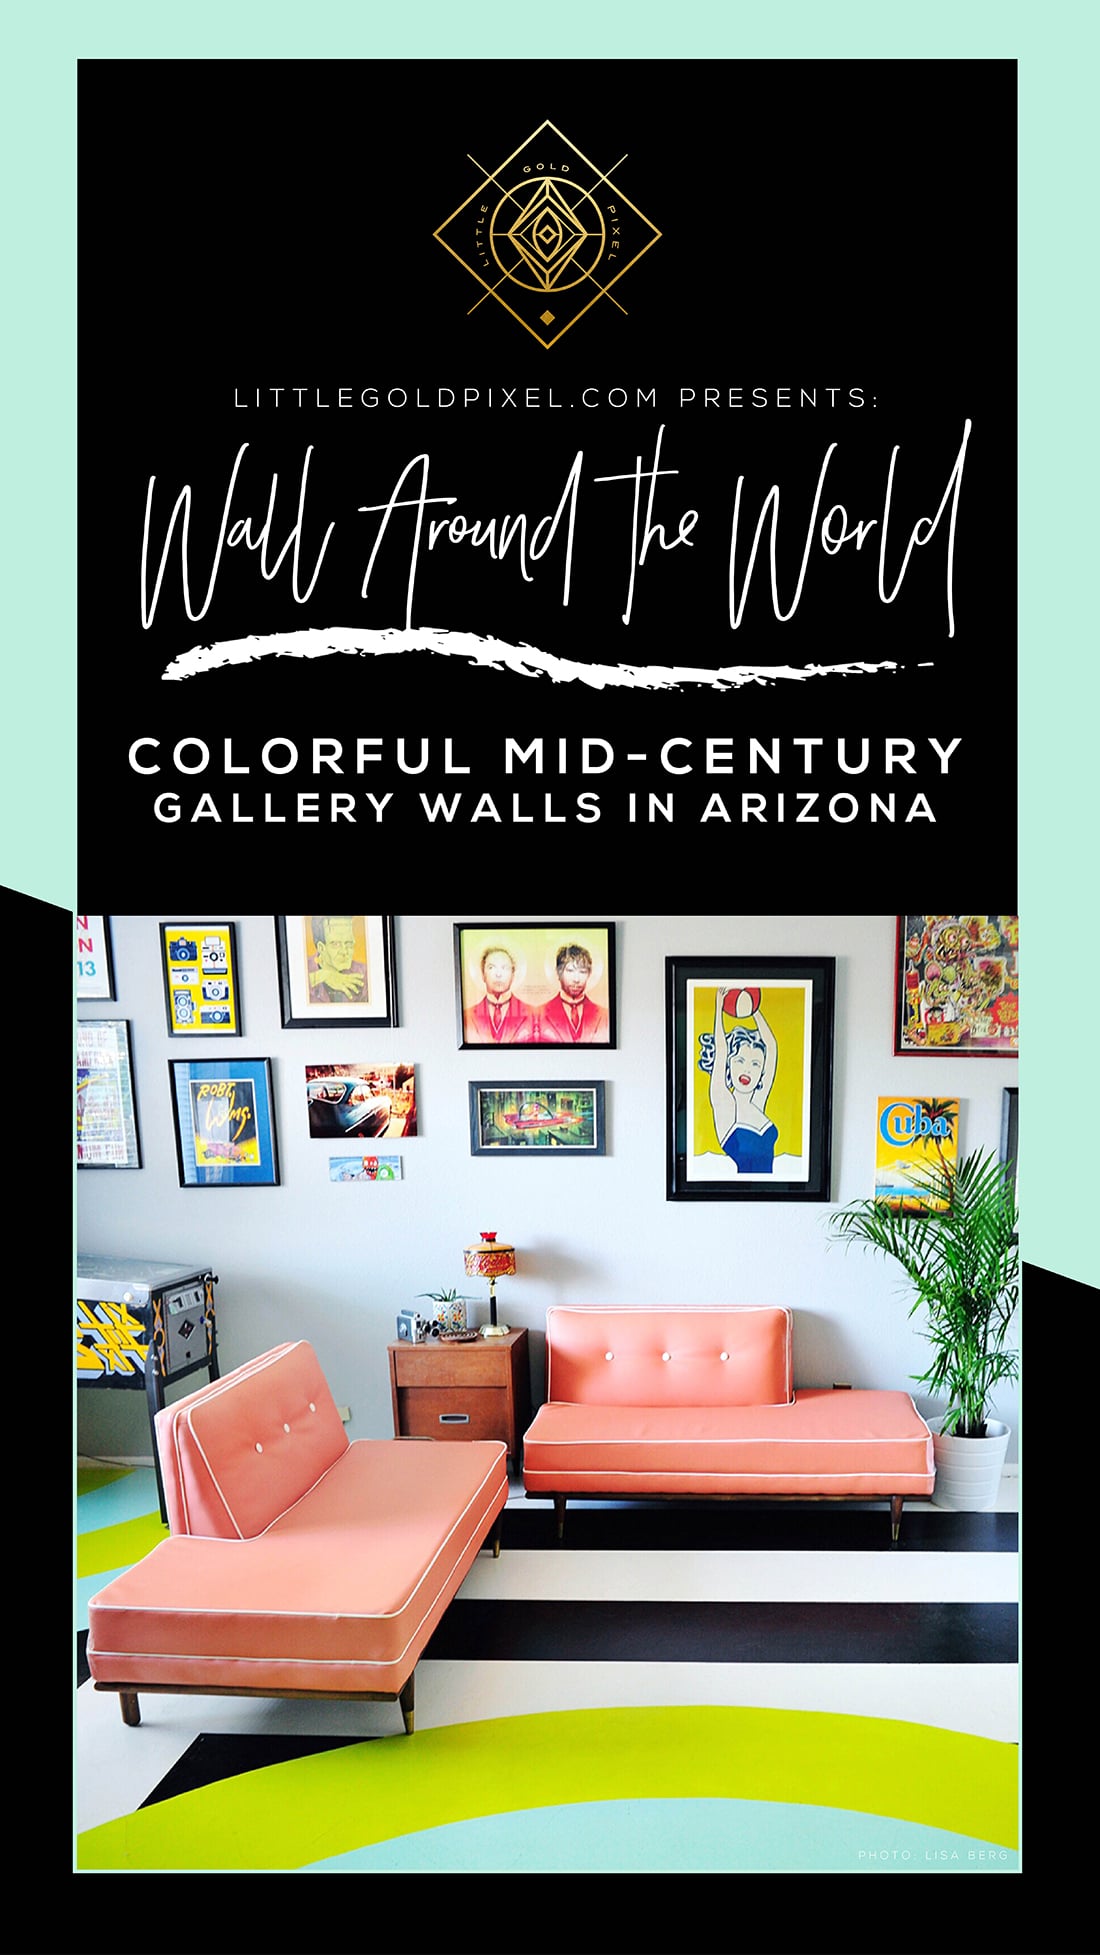 Wall Around the World: A Gallery Wall Series by Little Gold Pixel • Part 7: Colorful Mid-Century Gallery Walls in Arizona